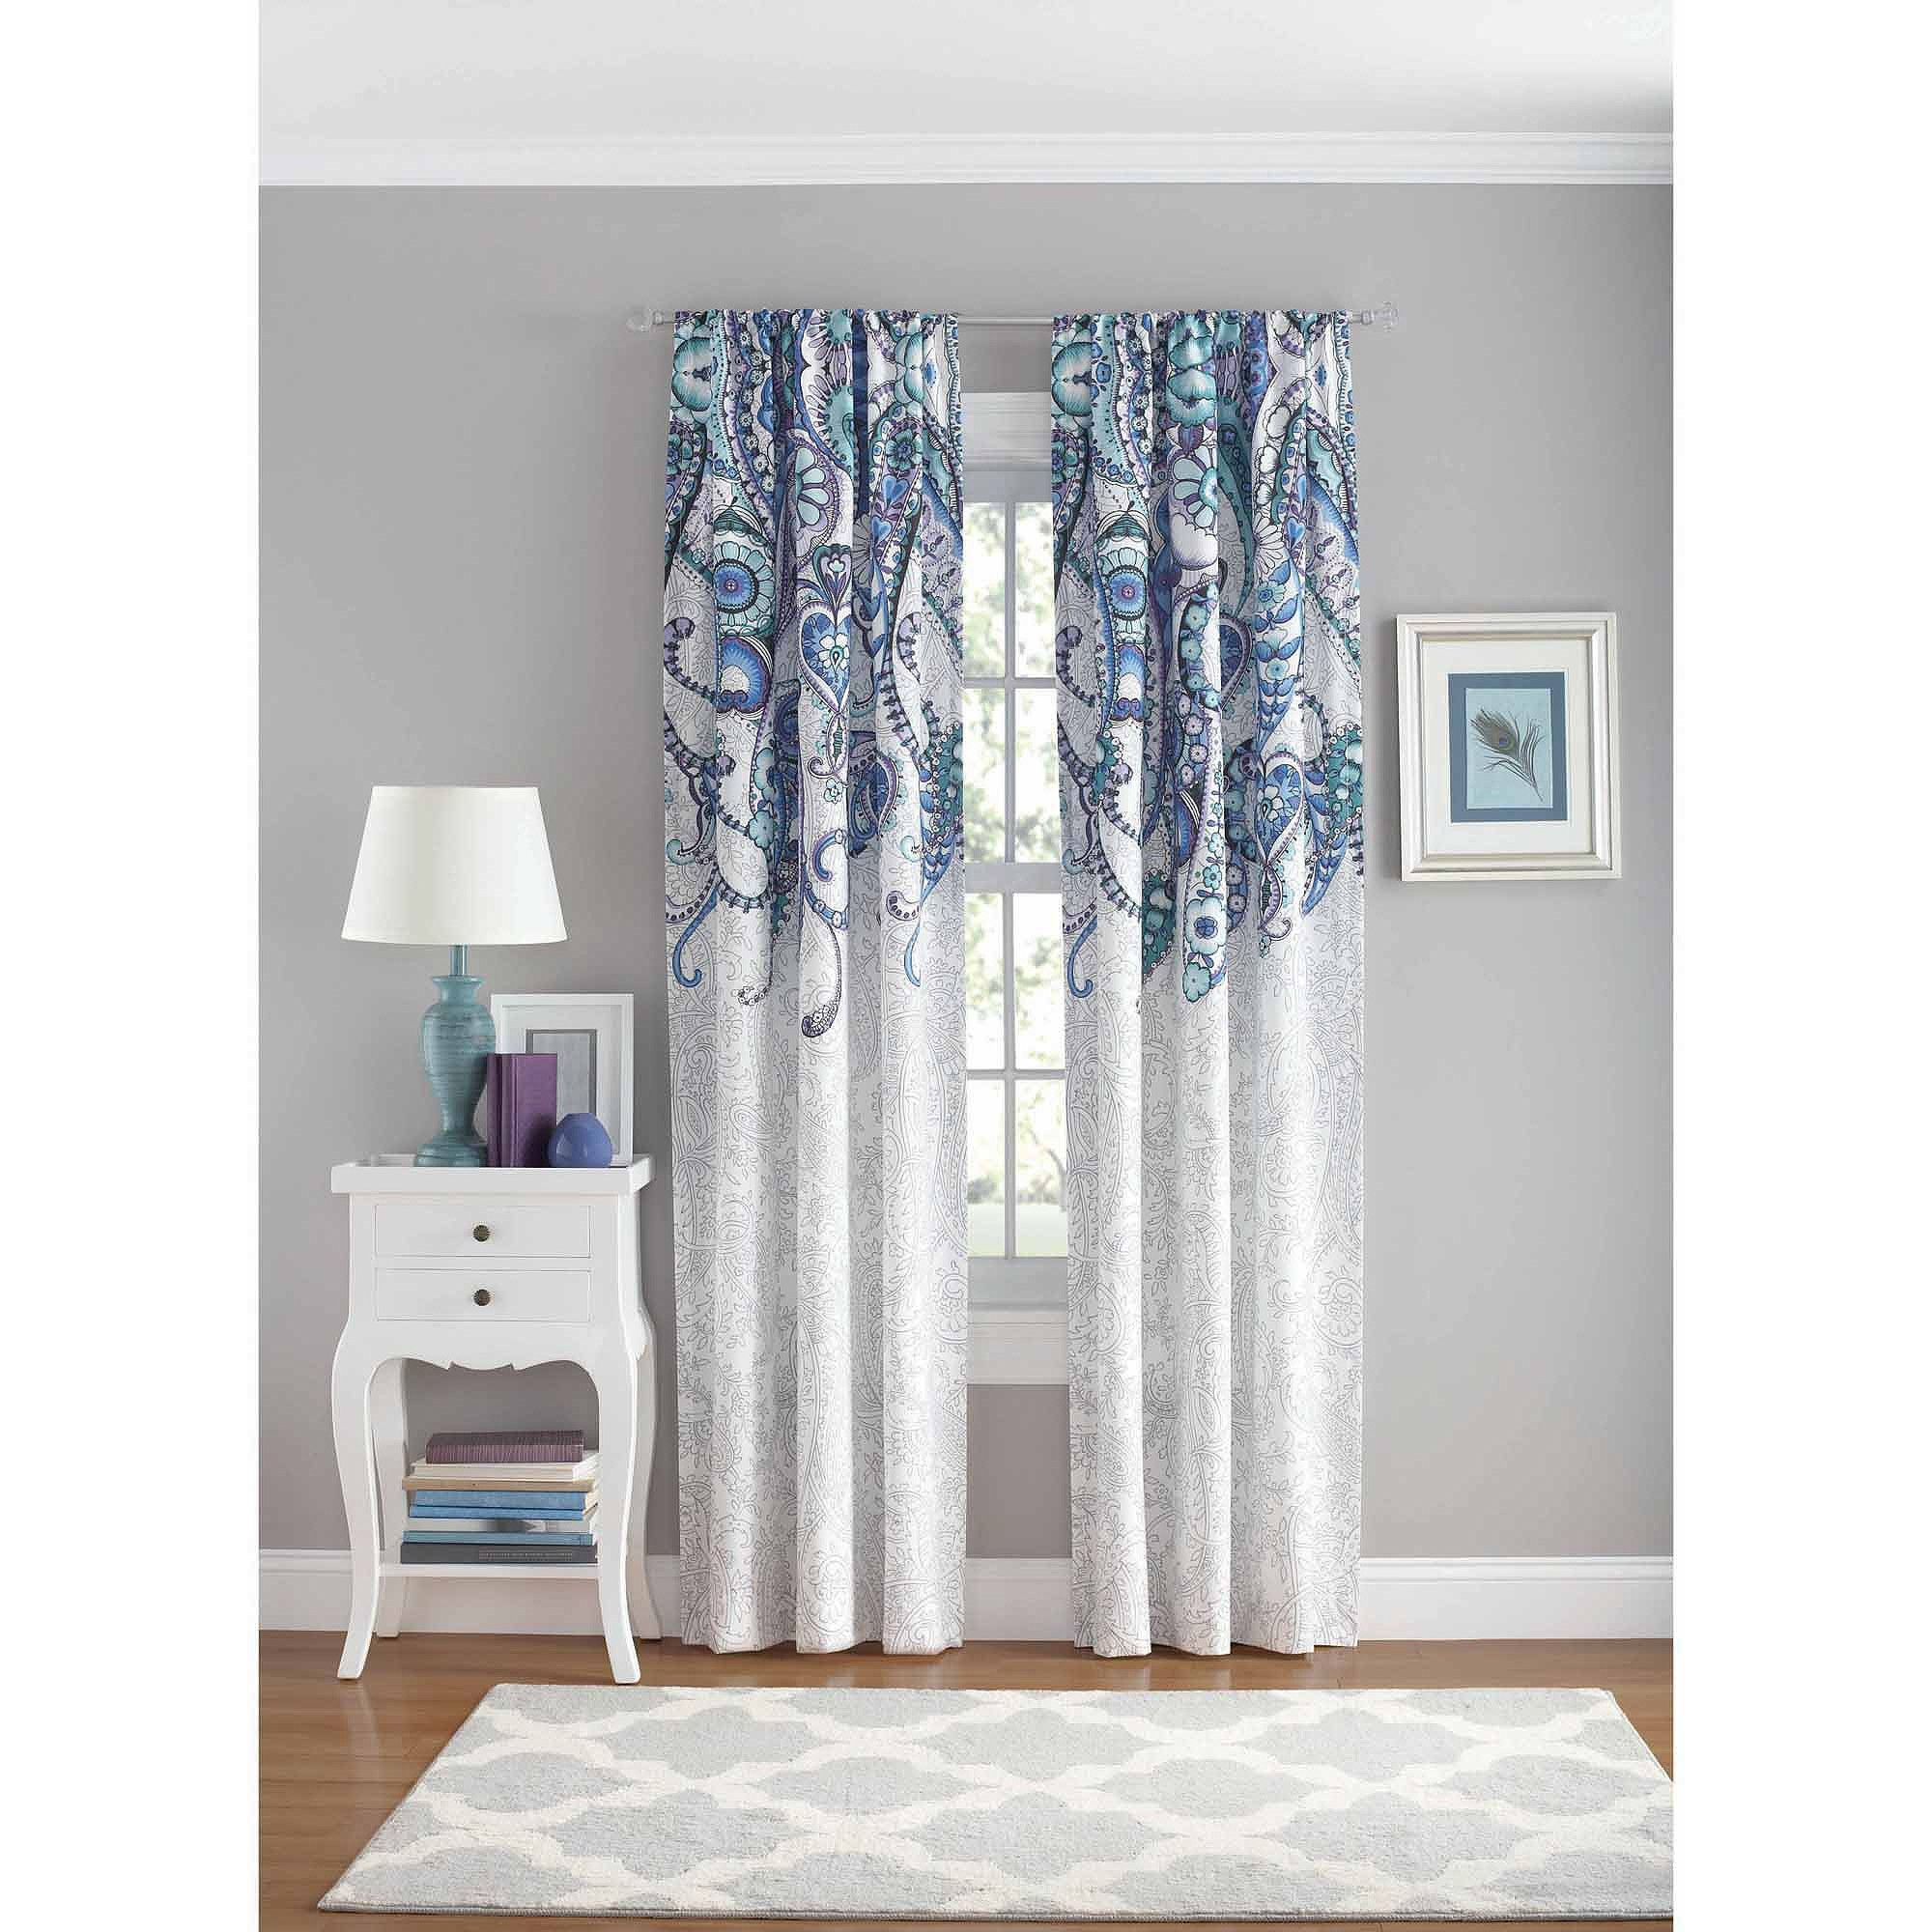 Walmart Curtains For Living Room
 Curtain Curtains At Walmart For Elegant Home Accessories